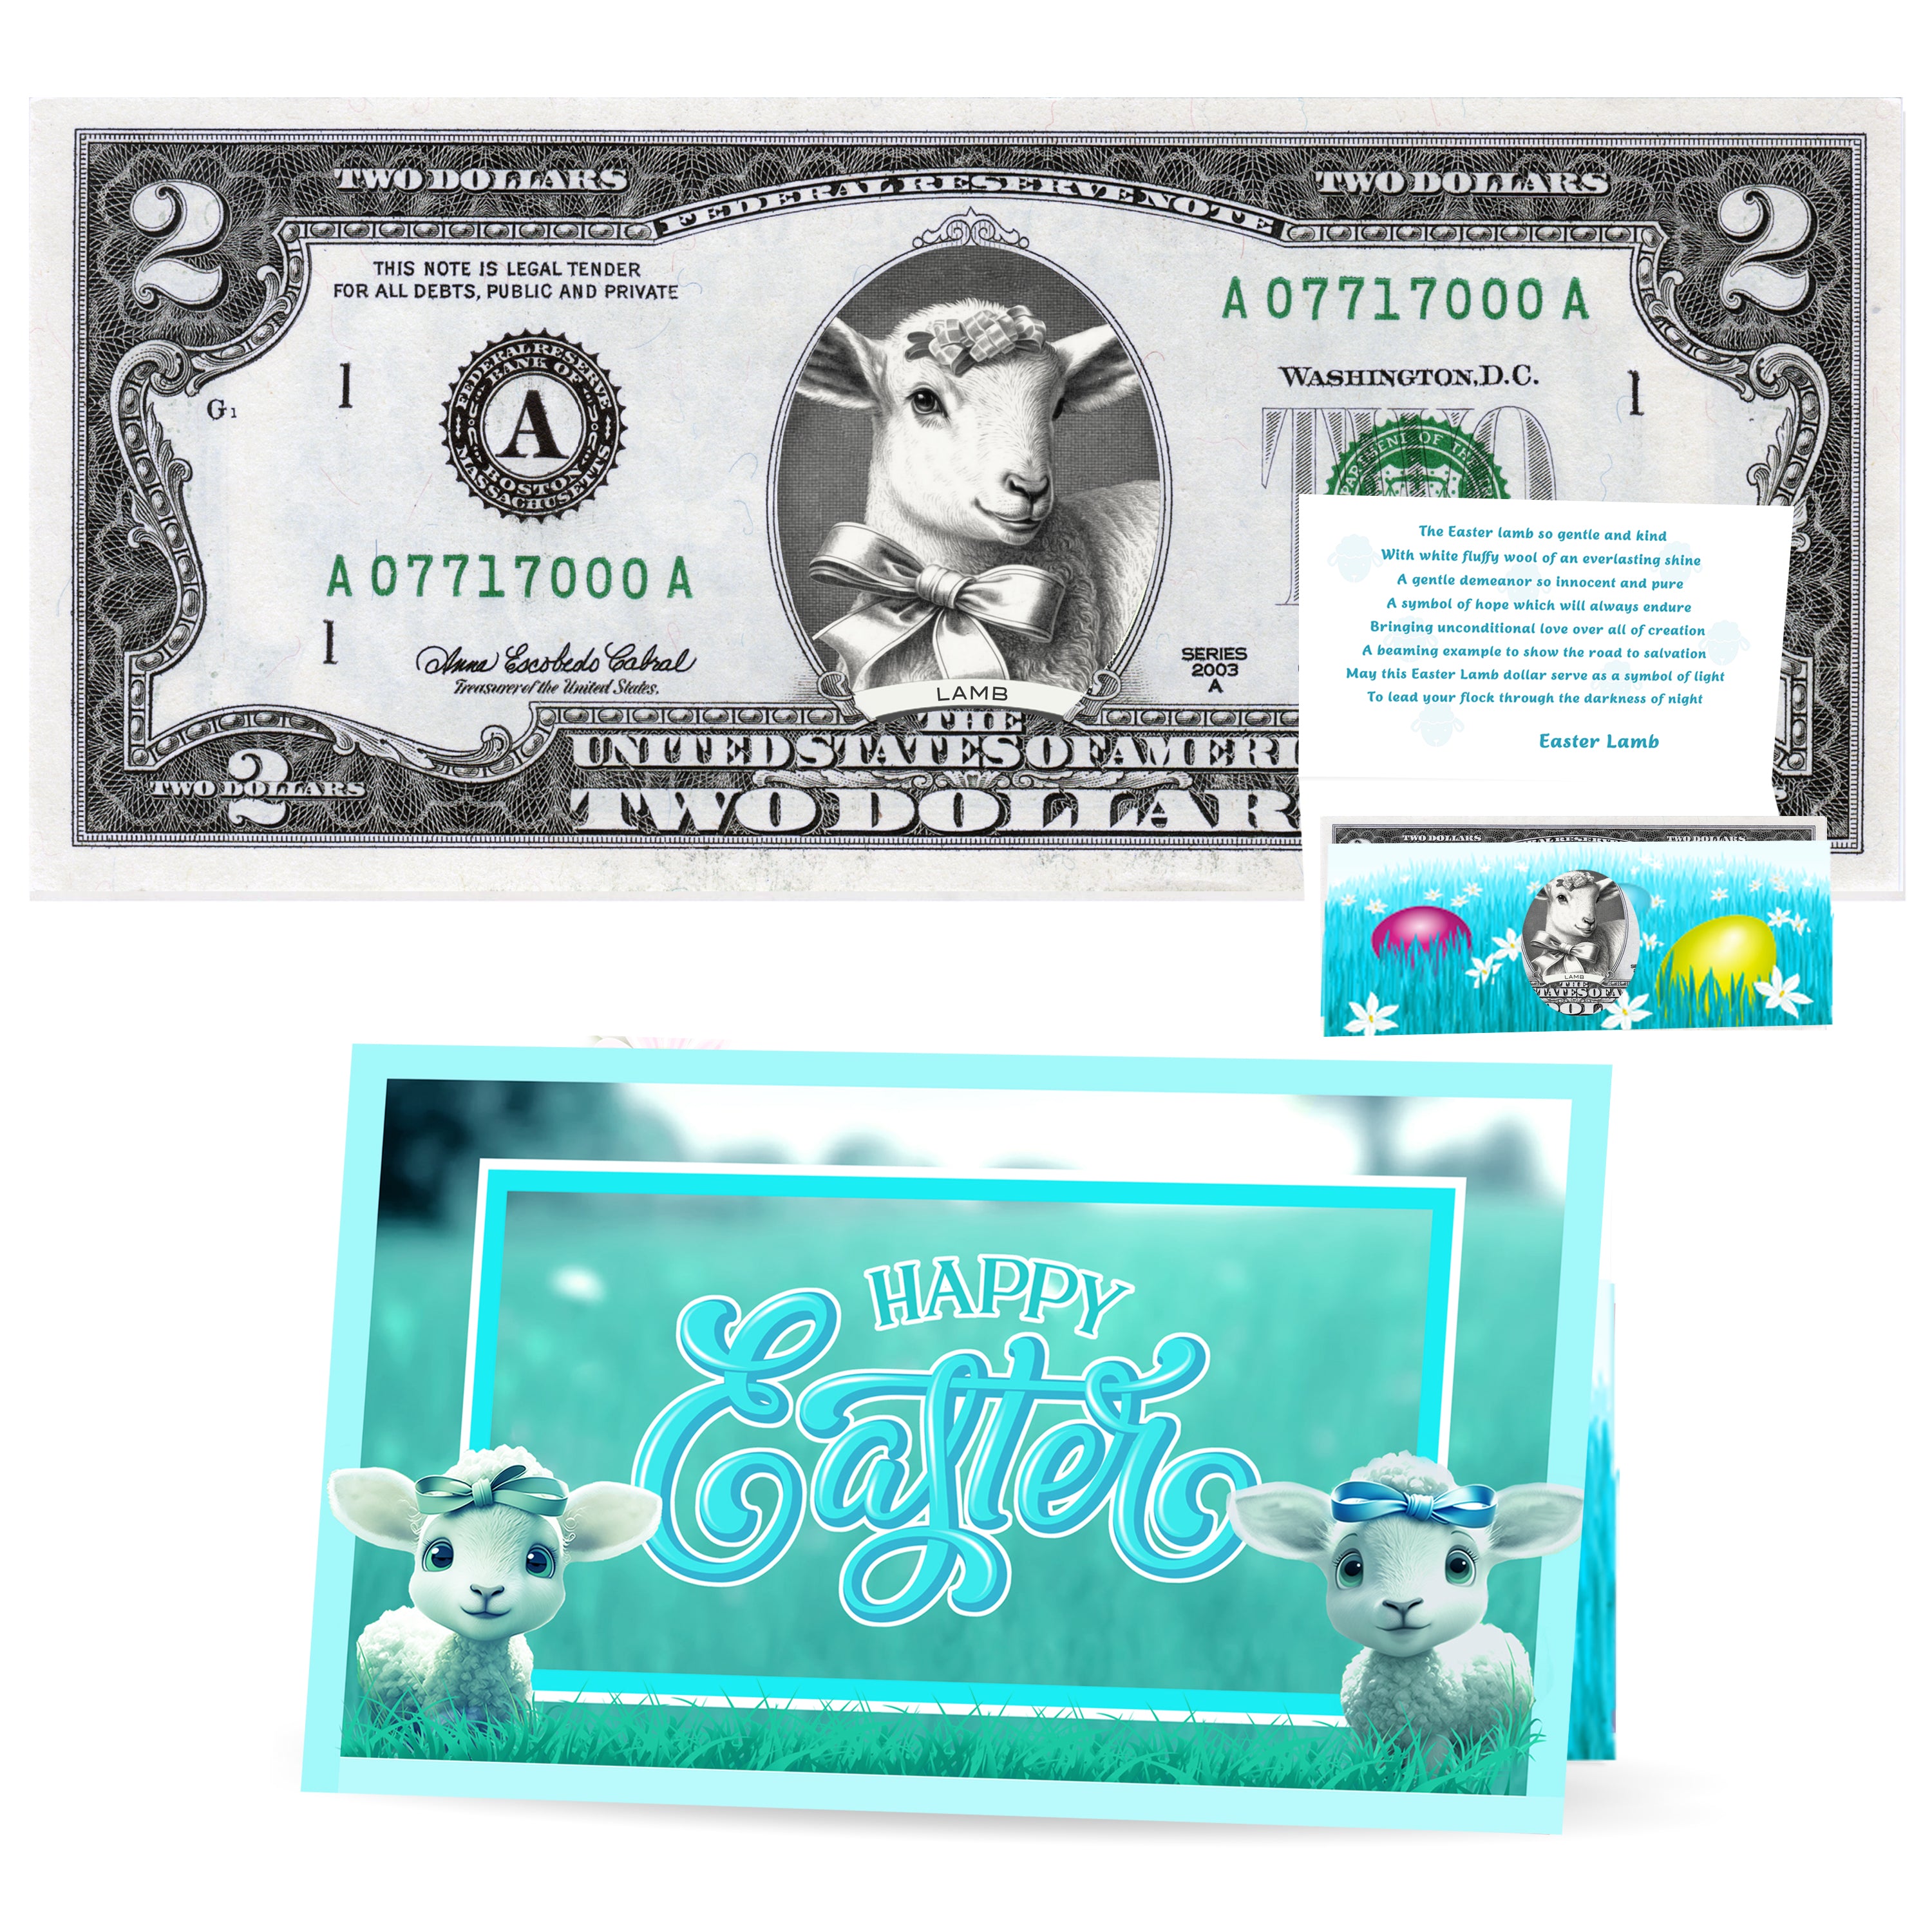 The Official Easter Lamb Dollar Bill. Real 2.0 USD. Each Bill Comes with an Easter Card and Currency Holder. Easter Basket Stuffer/Filler